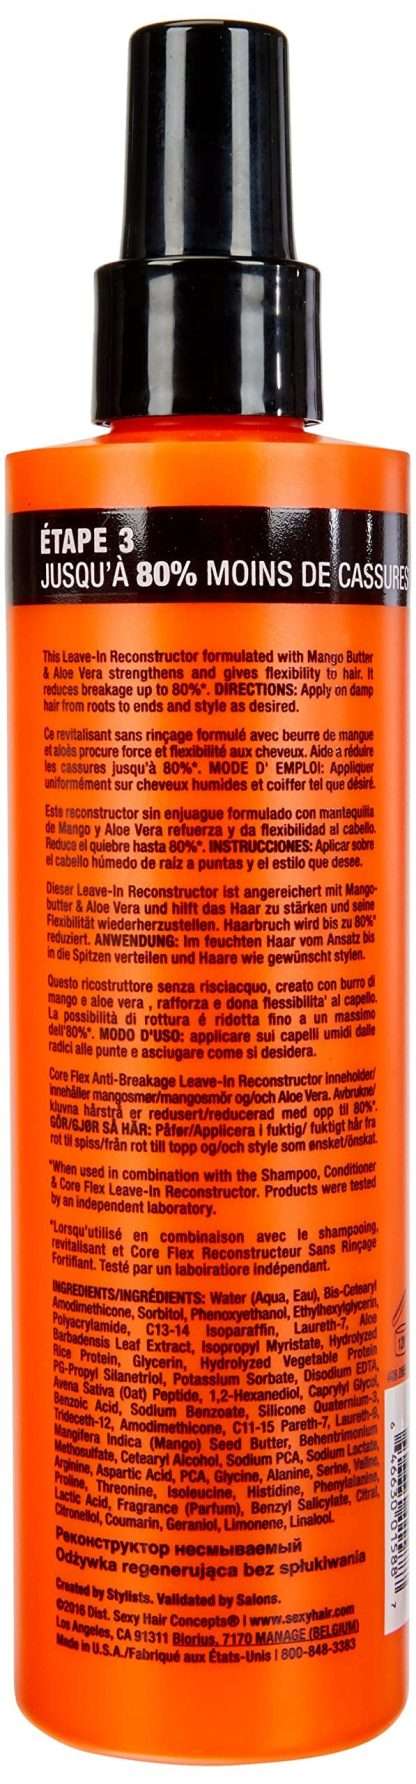 SEXY HAIR by Sexy Hair Concepts STRONG SEXY HAIR CORE FLEX LEAVE-IN RECONSTRUCTOR 8.5 OZ